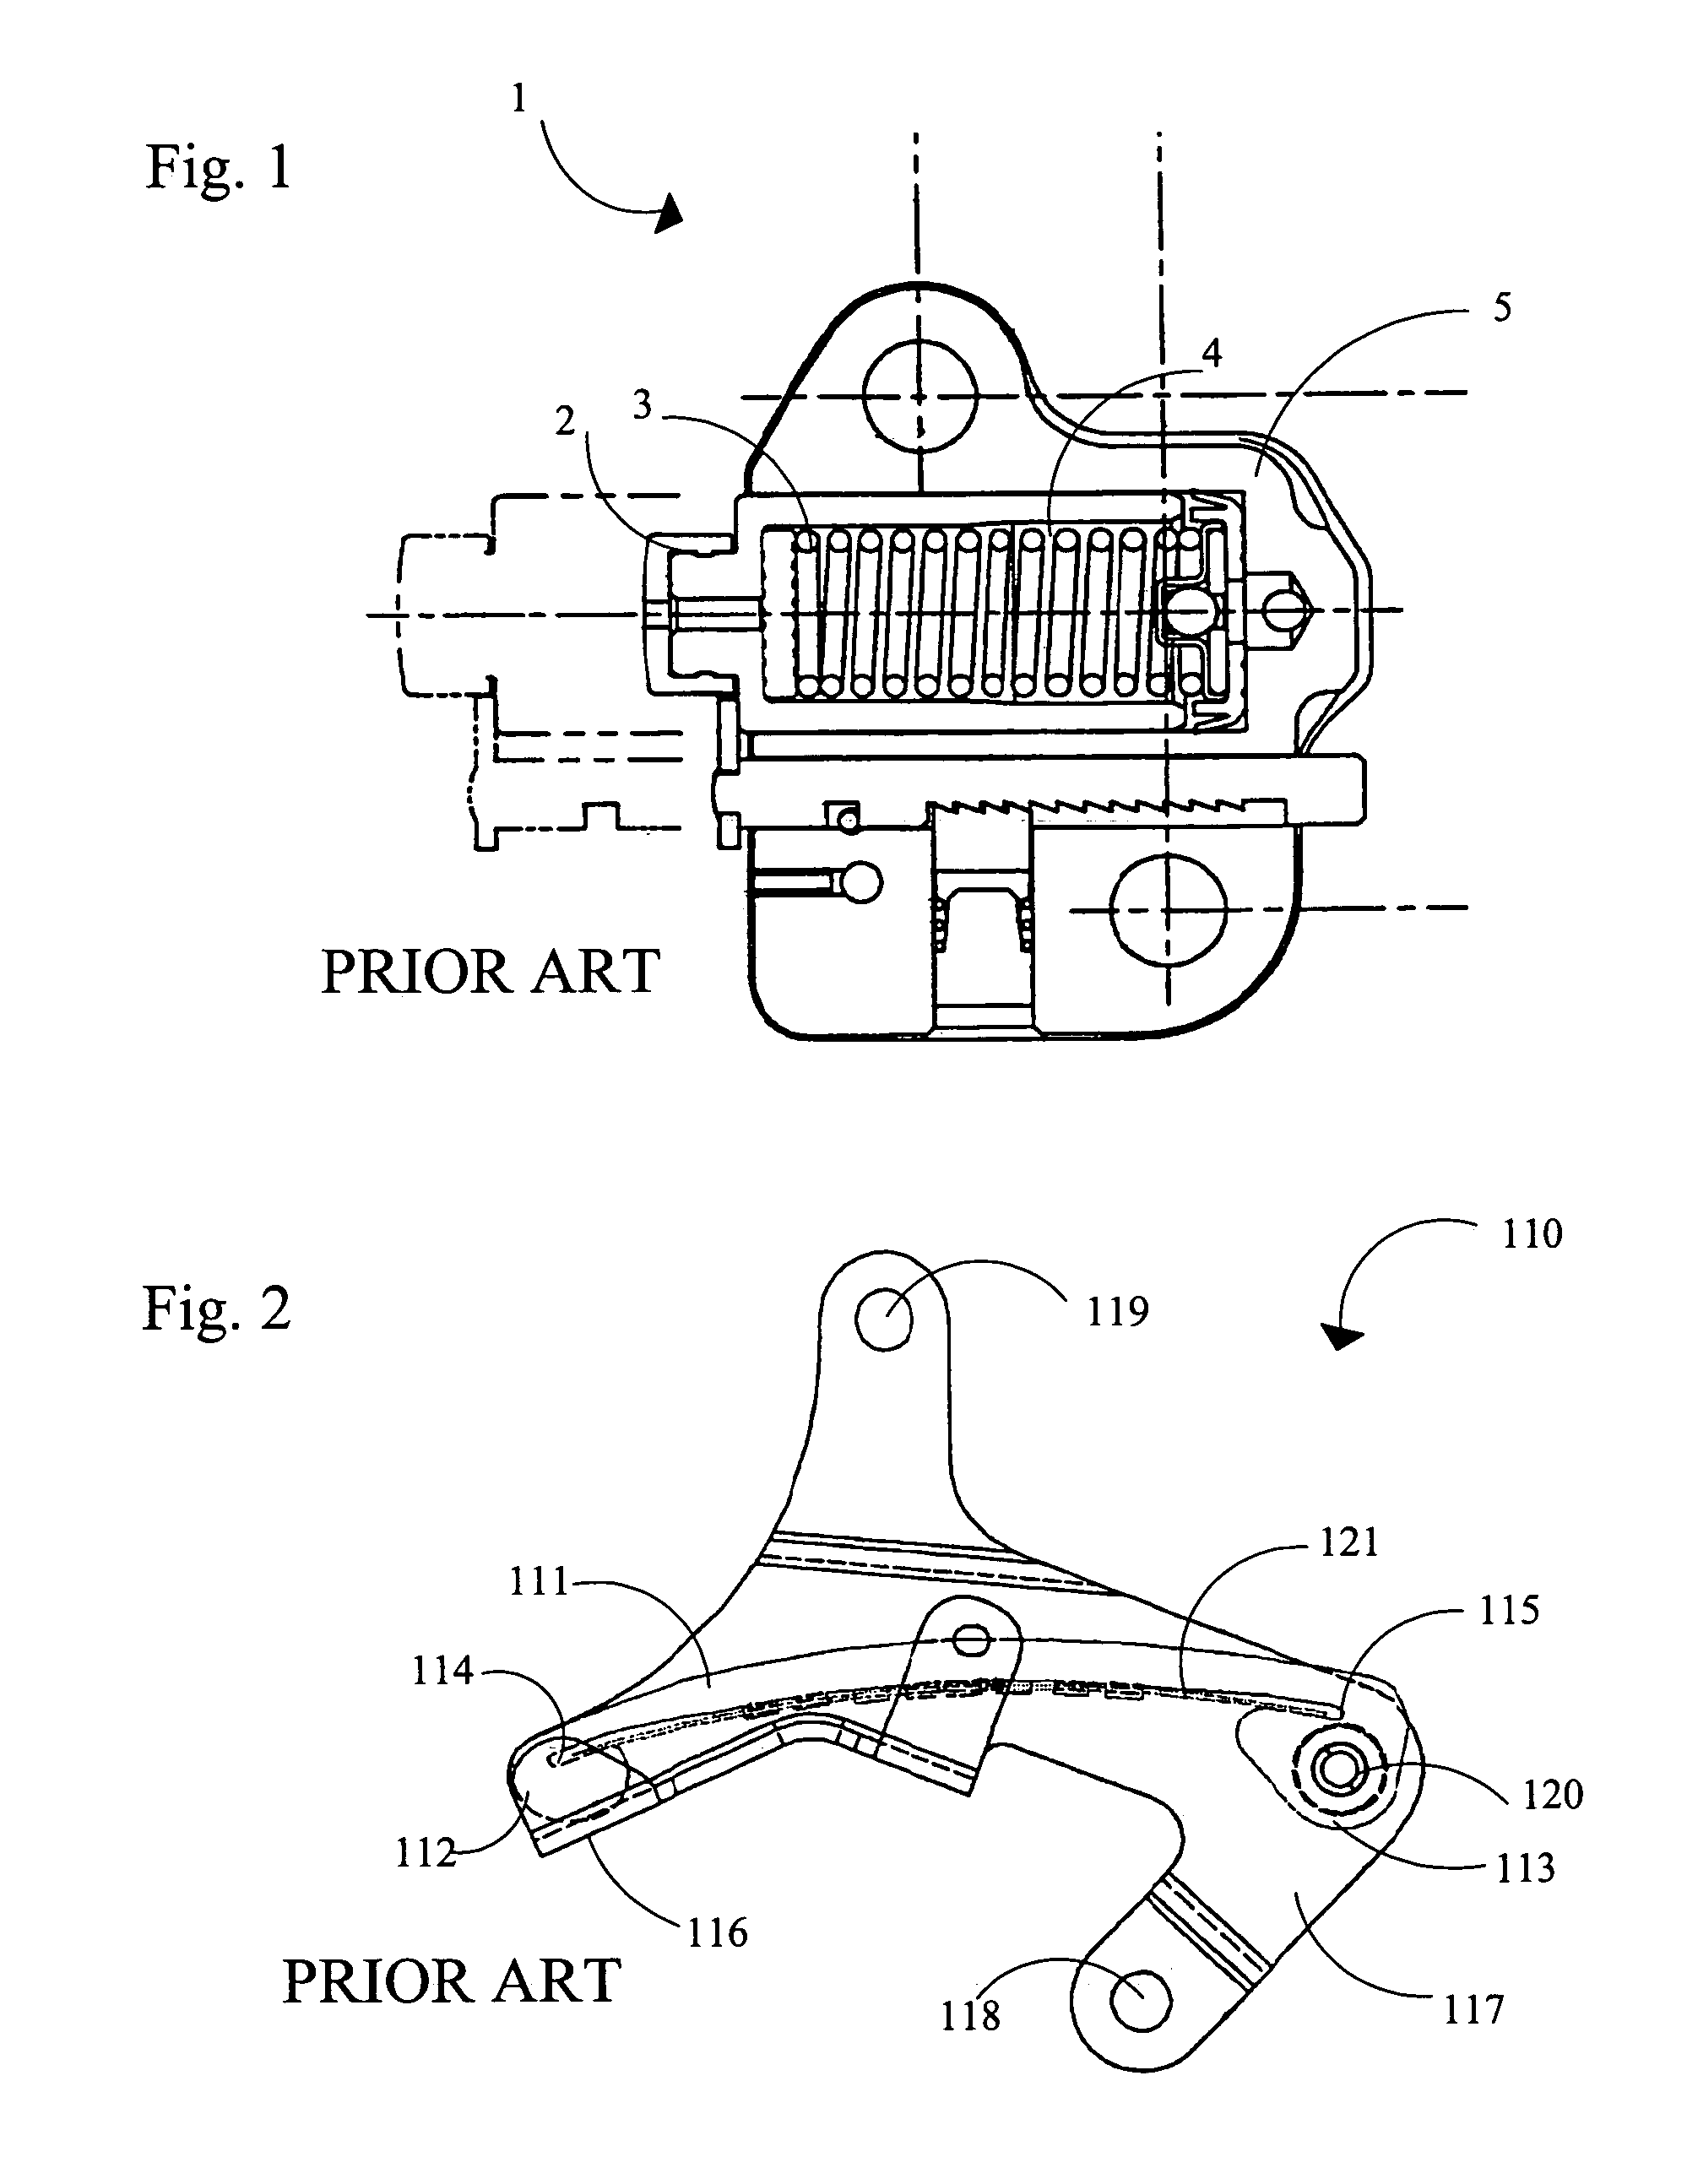 Mechanical chain tensioner with compliant blade spring